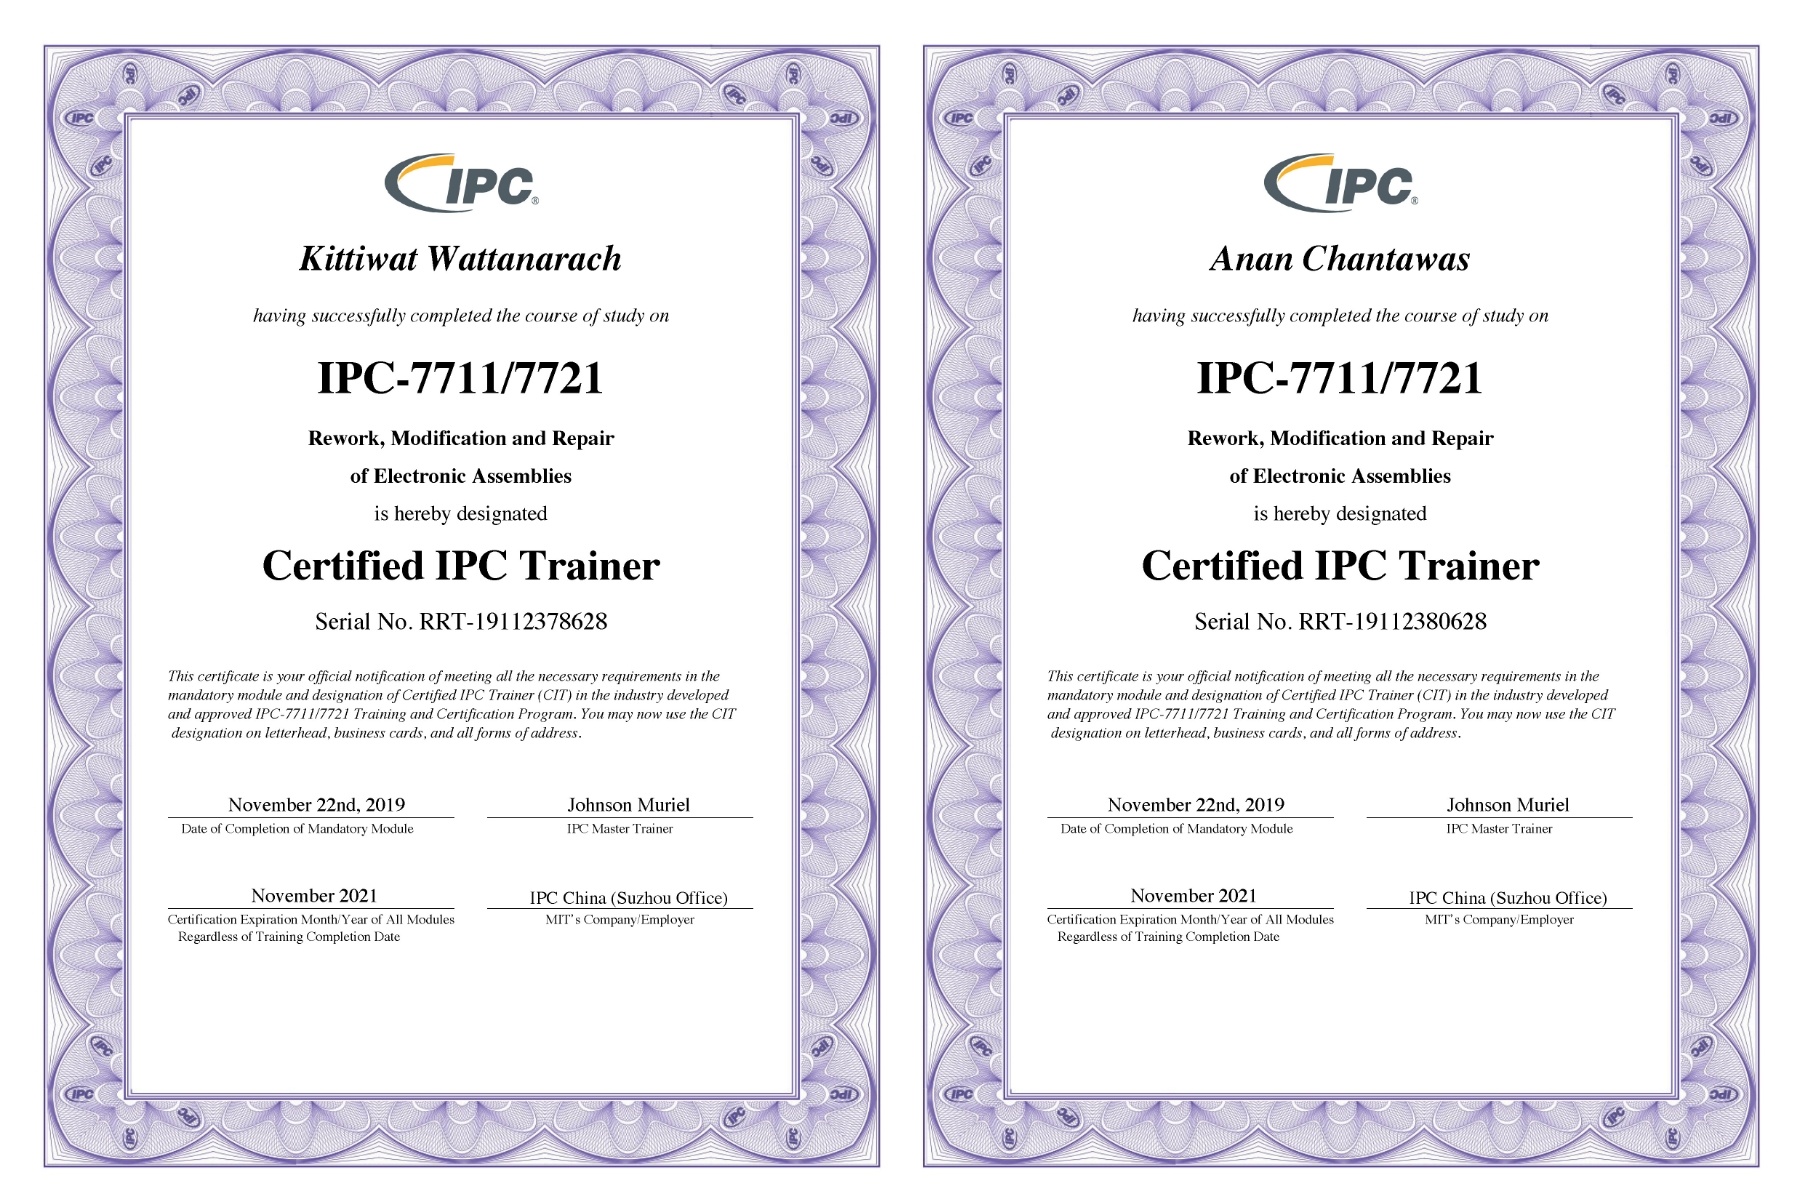 Certificates of Course Completion on Rework, Modification and Repair of Electronic Assemblies